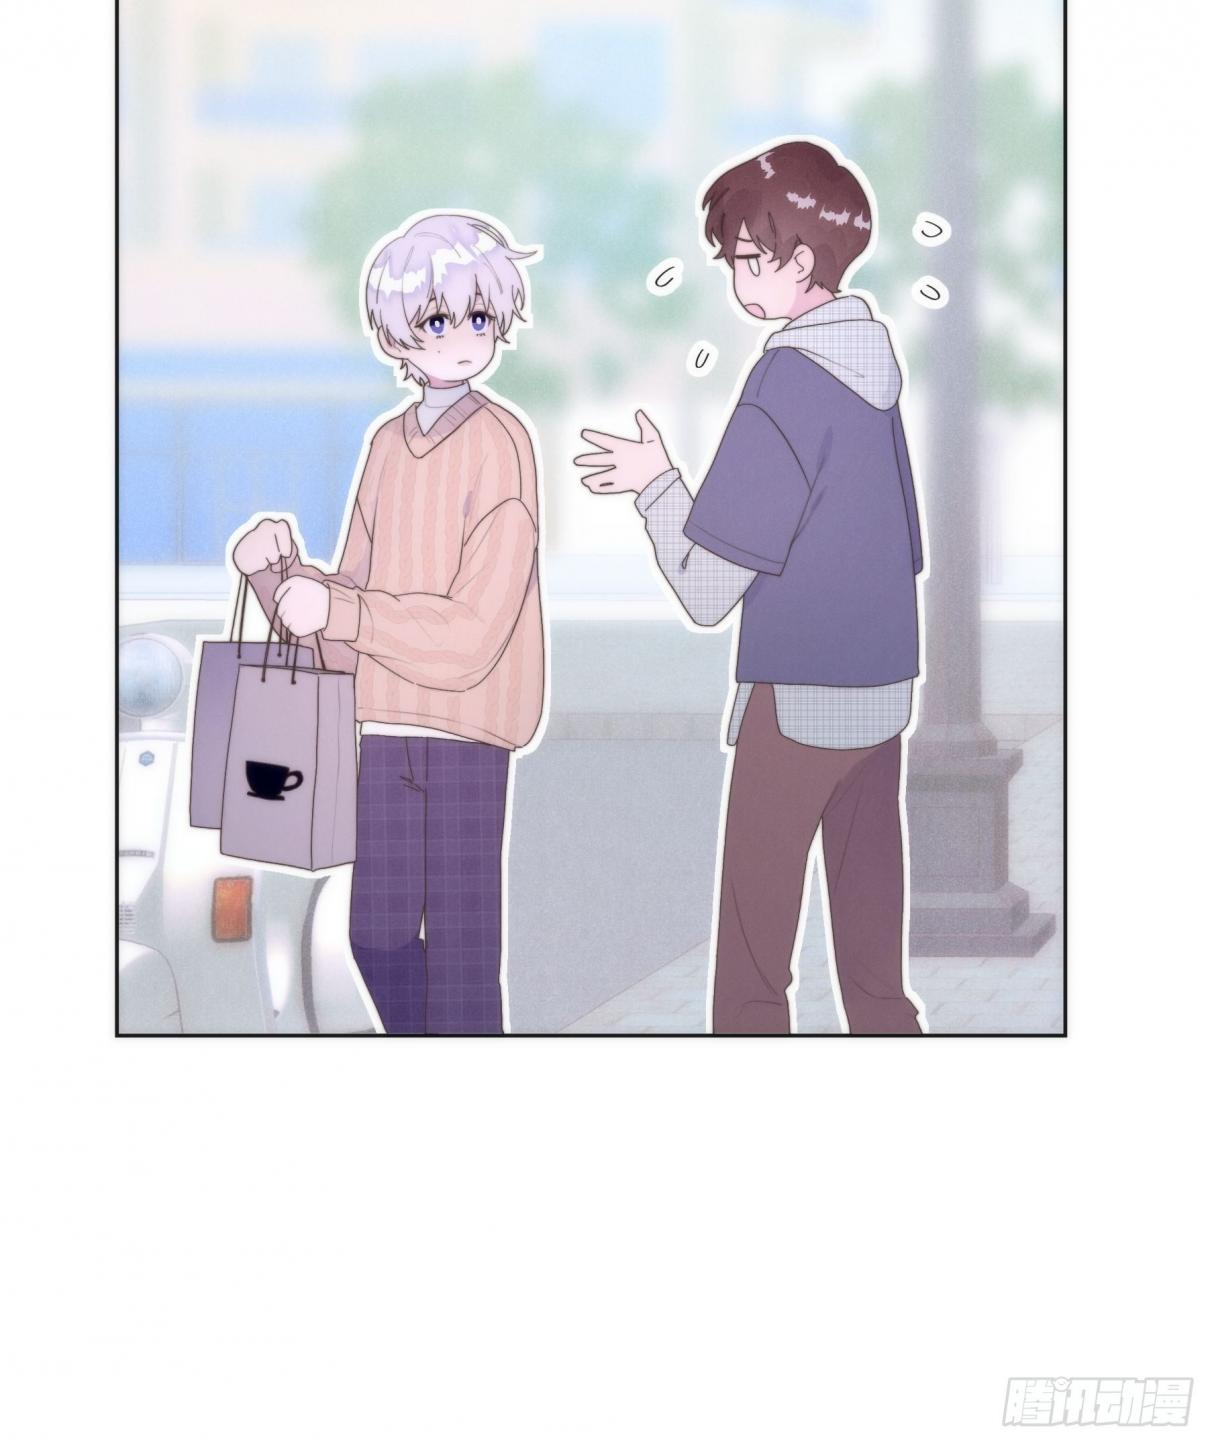 You're the Apple of My Eye Ch. 1 Reunion